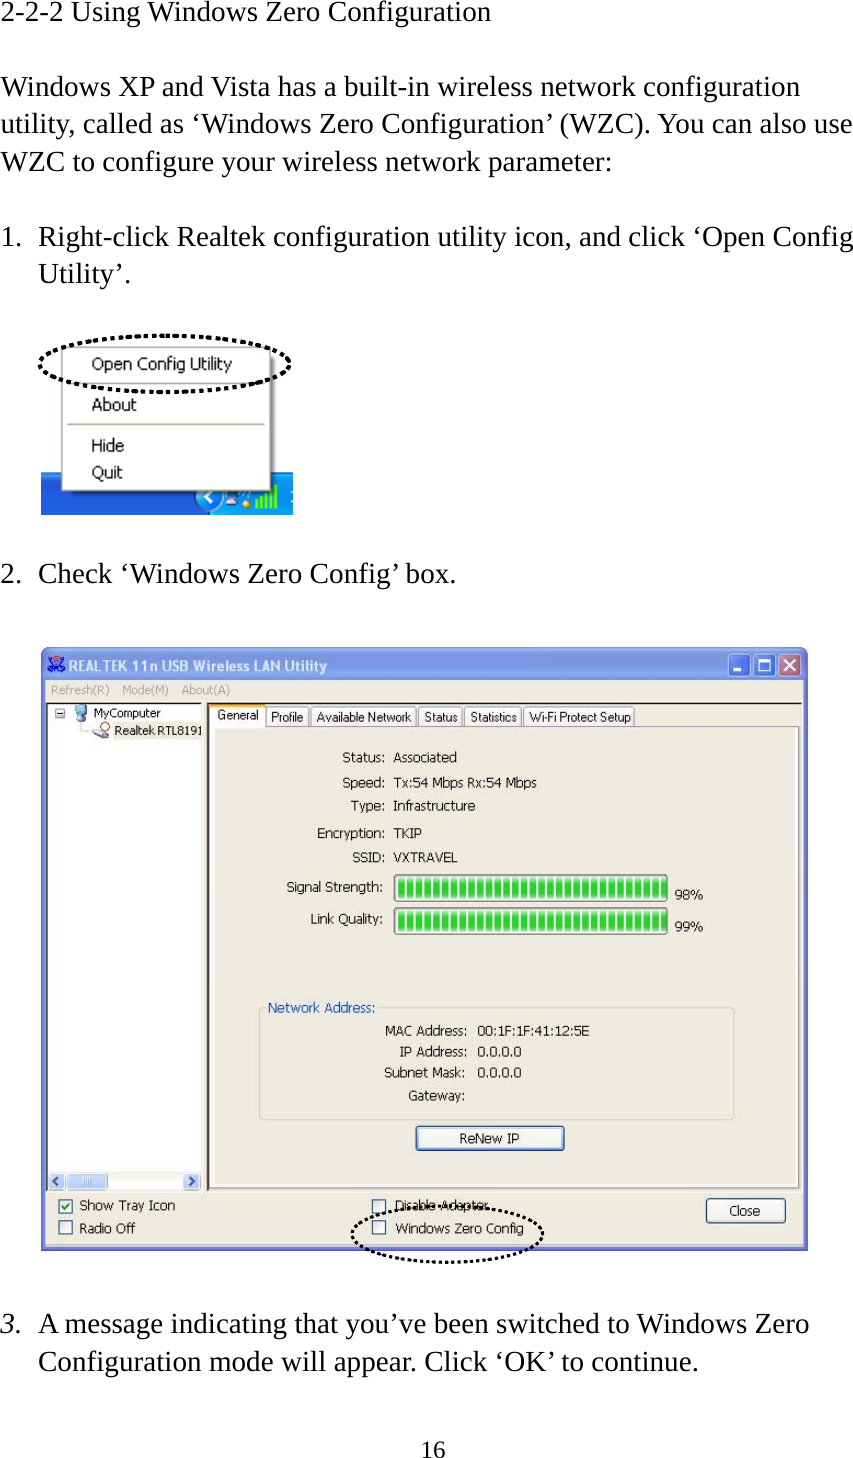 16  2-2-2 Using Windows Zero Configuration  Windows XP and Vista has a built-in wireless network configuration utility, called as ‘Windows Zero Configuration’ (WZC). You can also use WZC to configure your wireless network parameter:  1. Right-click Realtek configuration utility icon, and click ‘Open Config Utility’.    2. Check ‘Windows Zero Config’ box.    3. A message indicating that you’ve been switched to Windows Zero Configuration mode will appear. Click ‘OK’ to continue. 